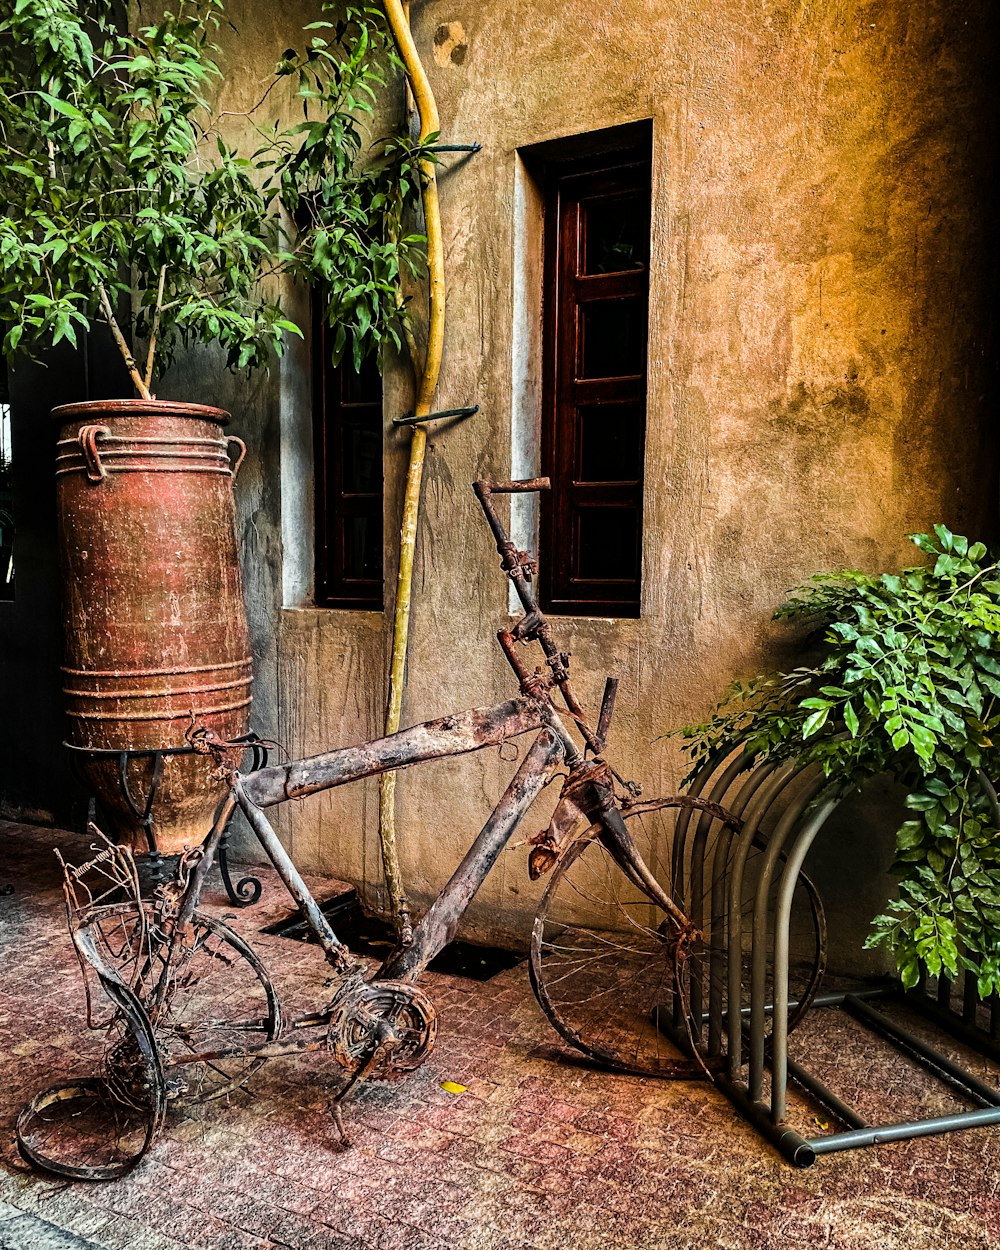 a rusty bicycle parked next to a potted plant